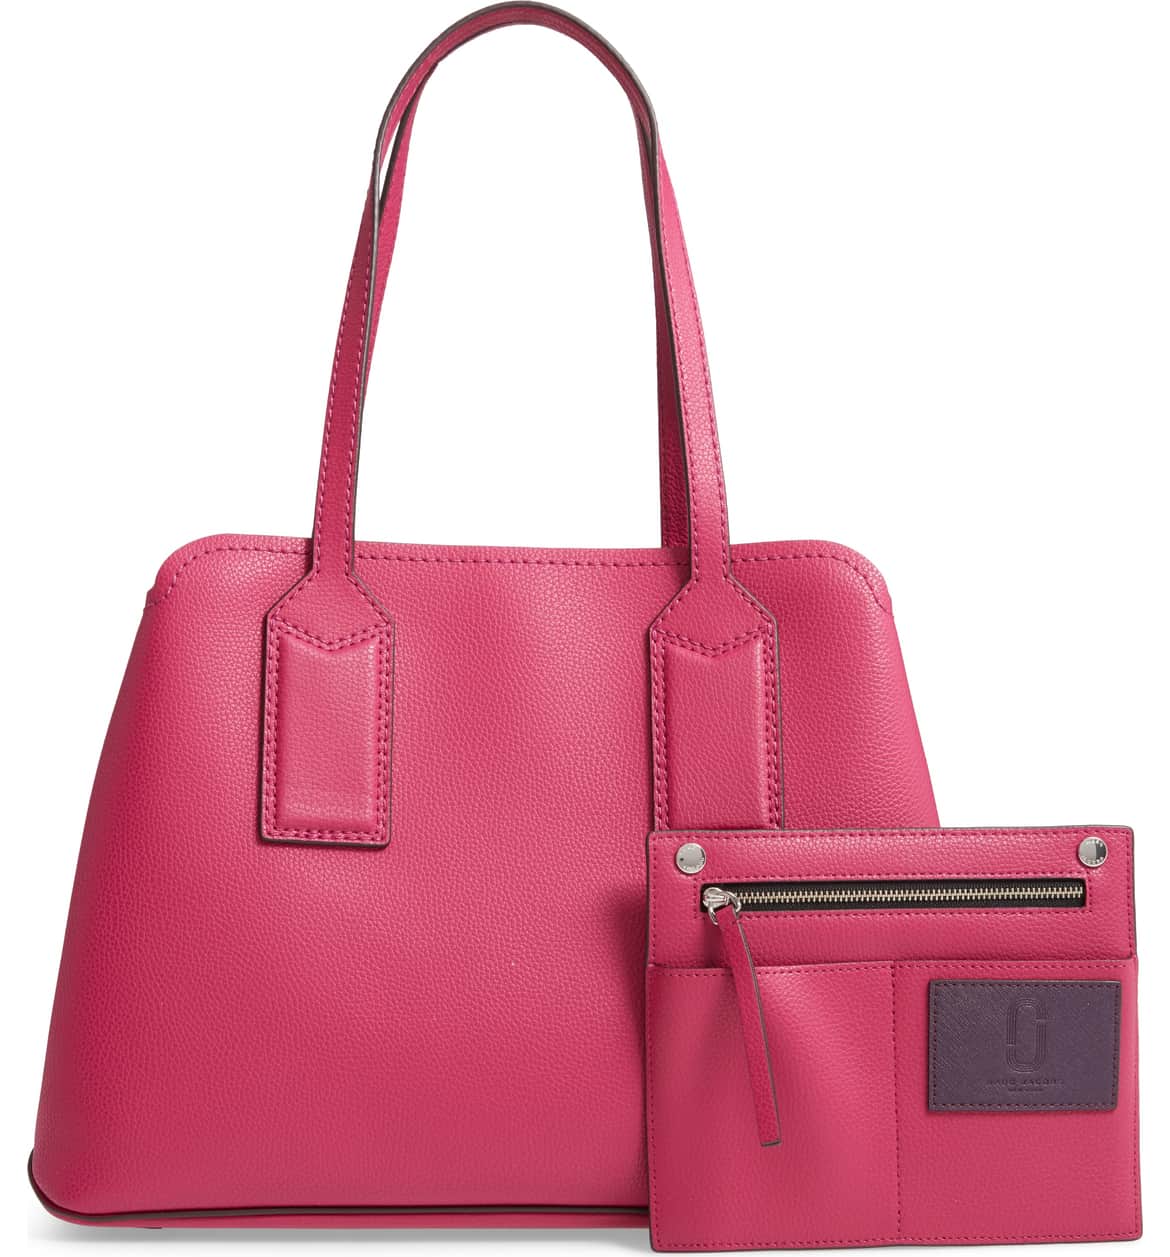 Cyber Monday Deal: This Sleek Marc Jacobs Tote Bag is 40 Percent Off